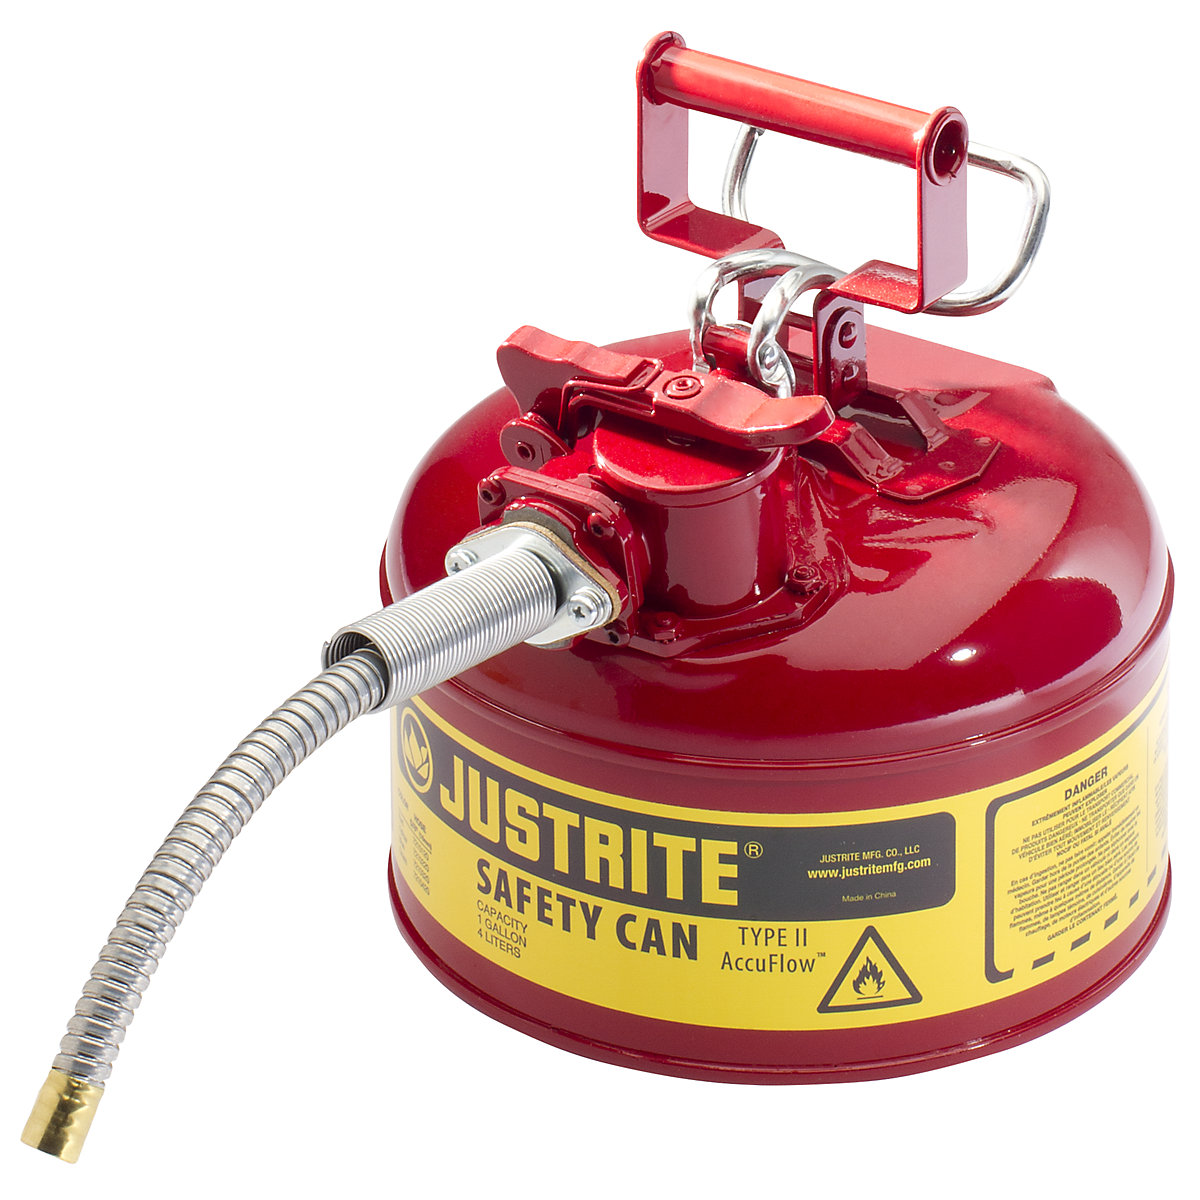 Safety container with flexible metal spout – Justrite